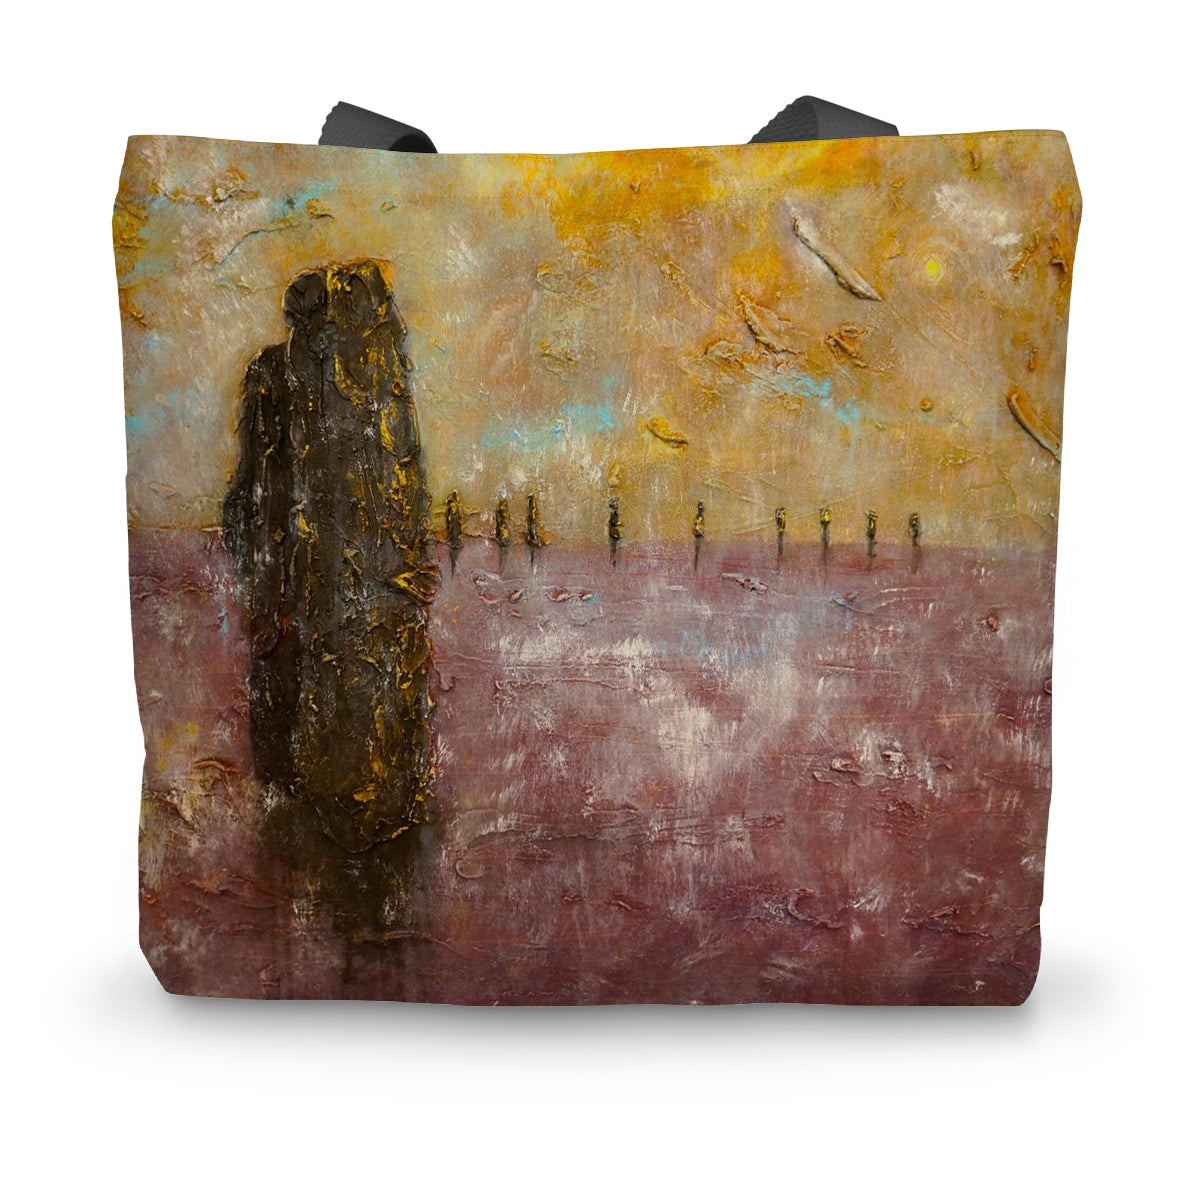 Brodgar Mist Orkney Art Gifts Canvas Tote Bag-Bags-Orkney Art Gallery-14"x18.5"-Paintings, Prints, Homeware, Art Gifts From Scotland By Scottish Artist Kevin Hunter